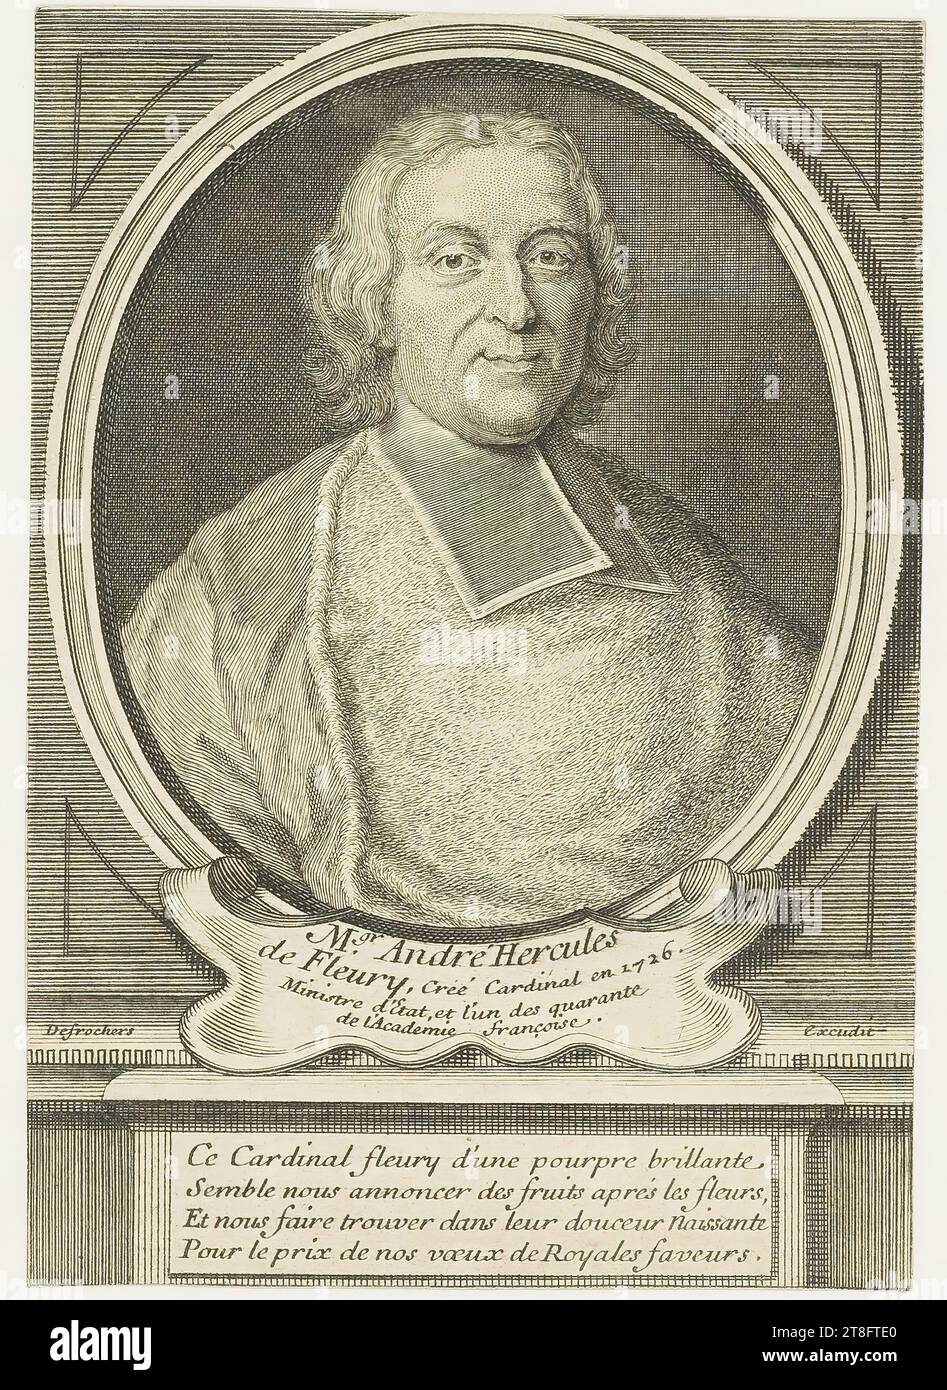 Msgr. André Hercules, of Fleury, created Cardinal in 1726., Minister of State, in one of the forty, of the Académie Françoise. Desrochers excudites. This cardinal fleury of a brilliant purple, Seems to announce fruits to us after the flowers, And to make us find in their nascent sweetness, For the price of our wishes, Royal favours Stock Photo